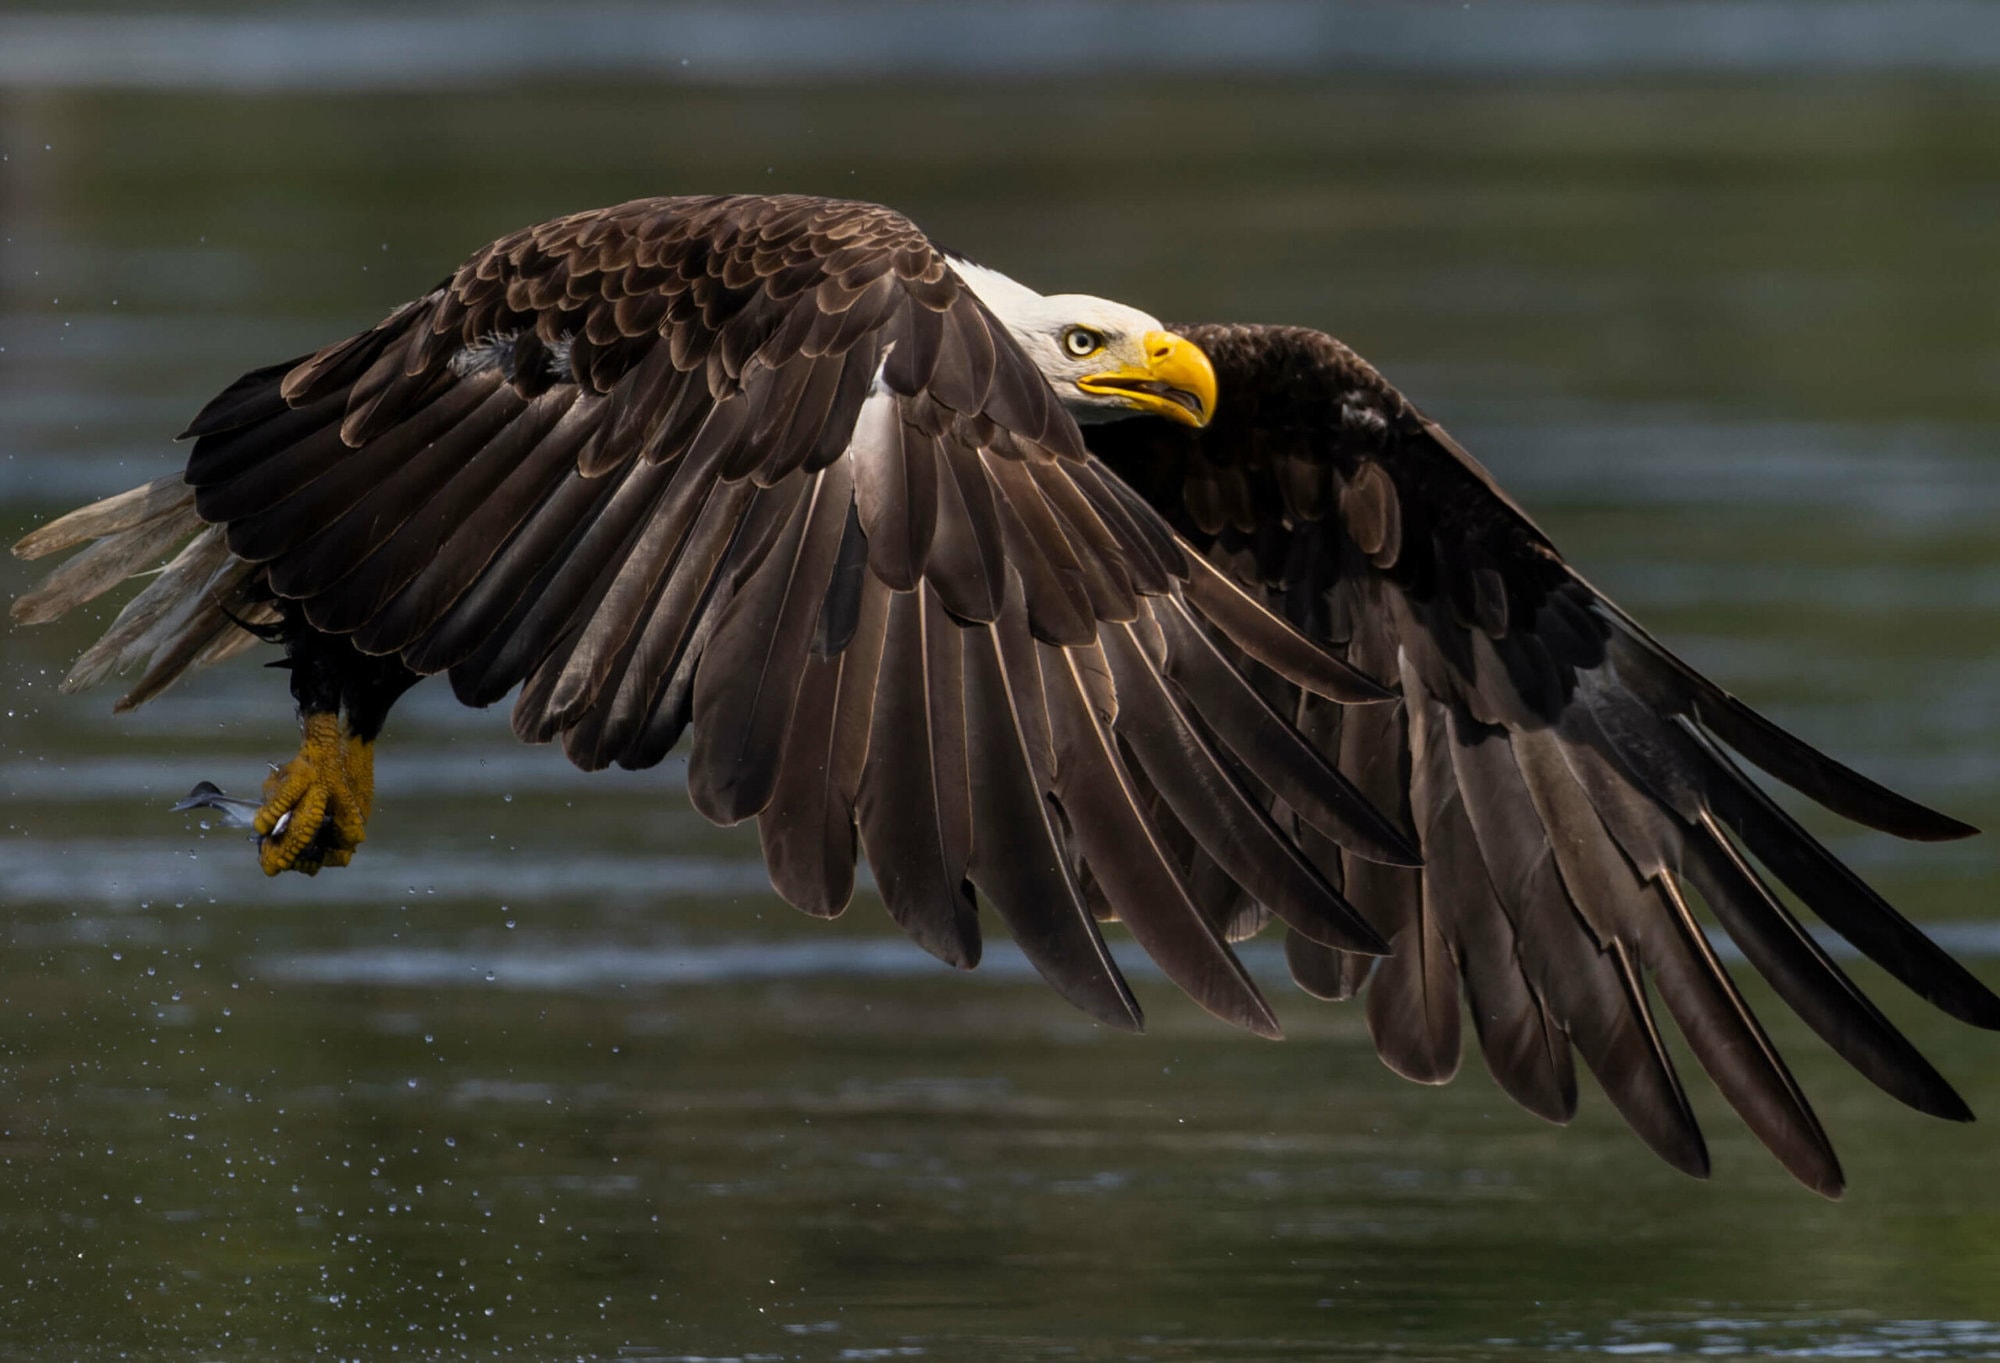 a bald eagle swooping its wings over the water